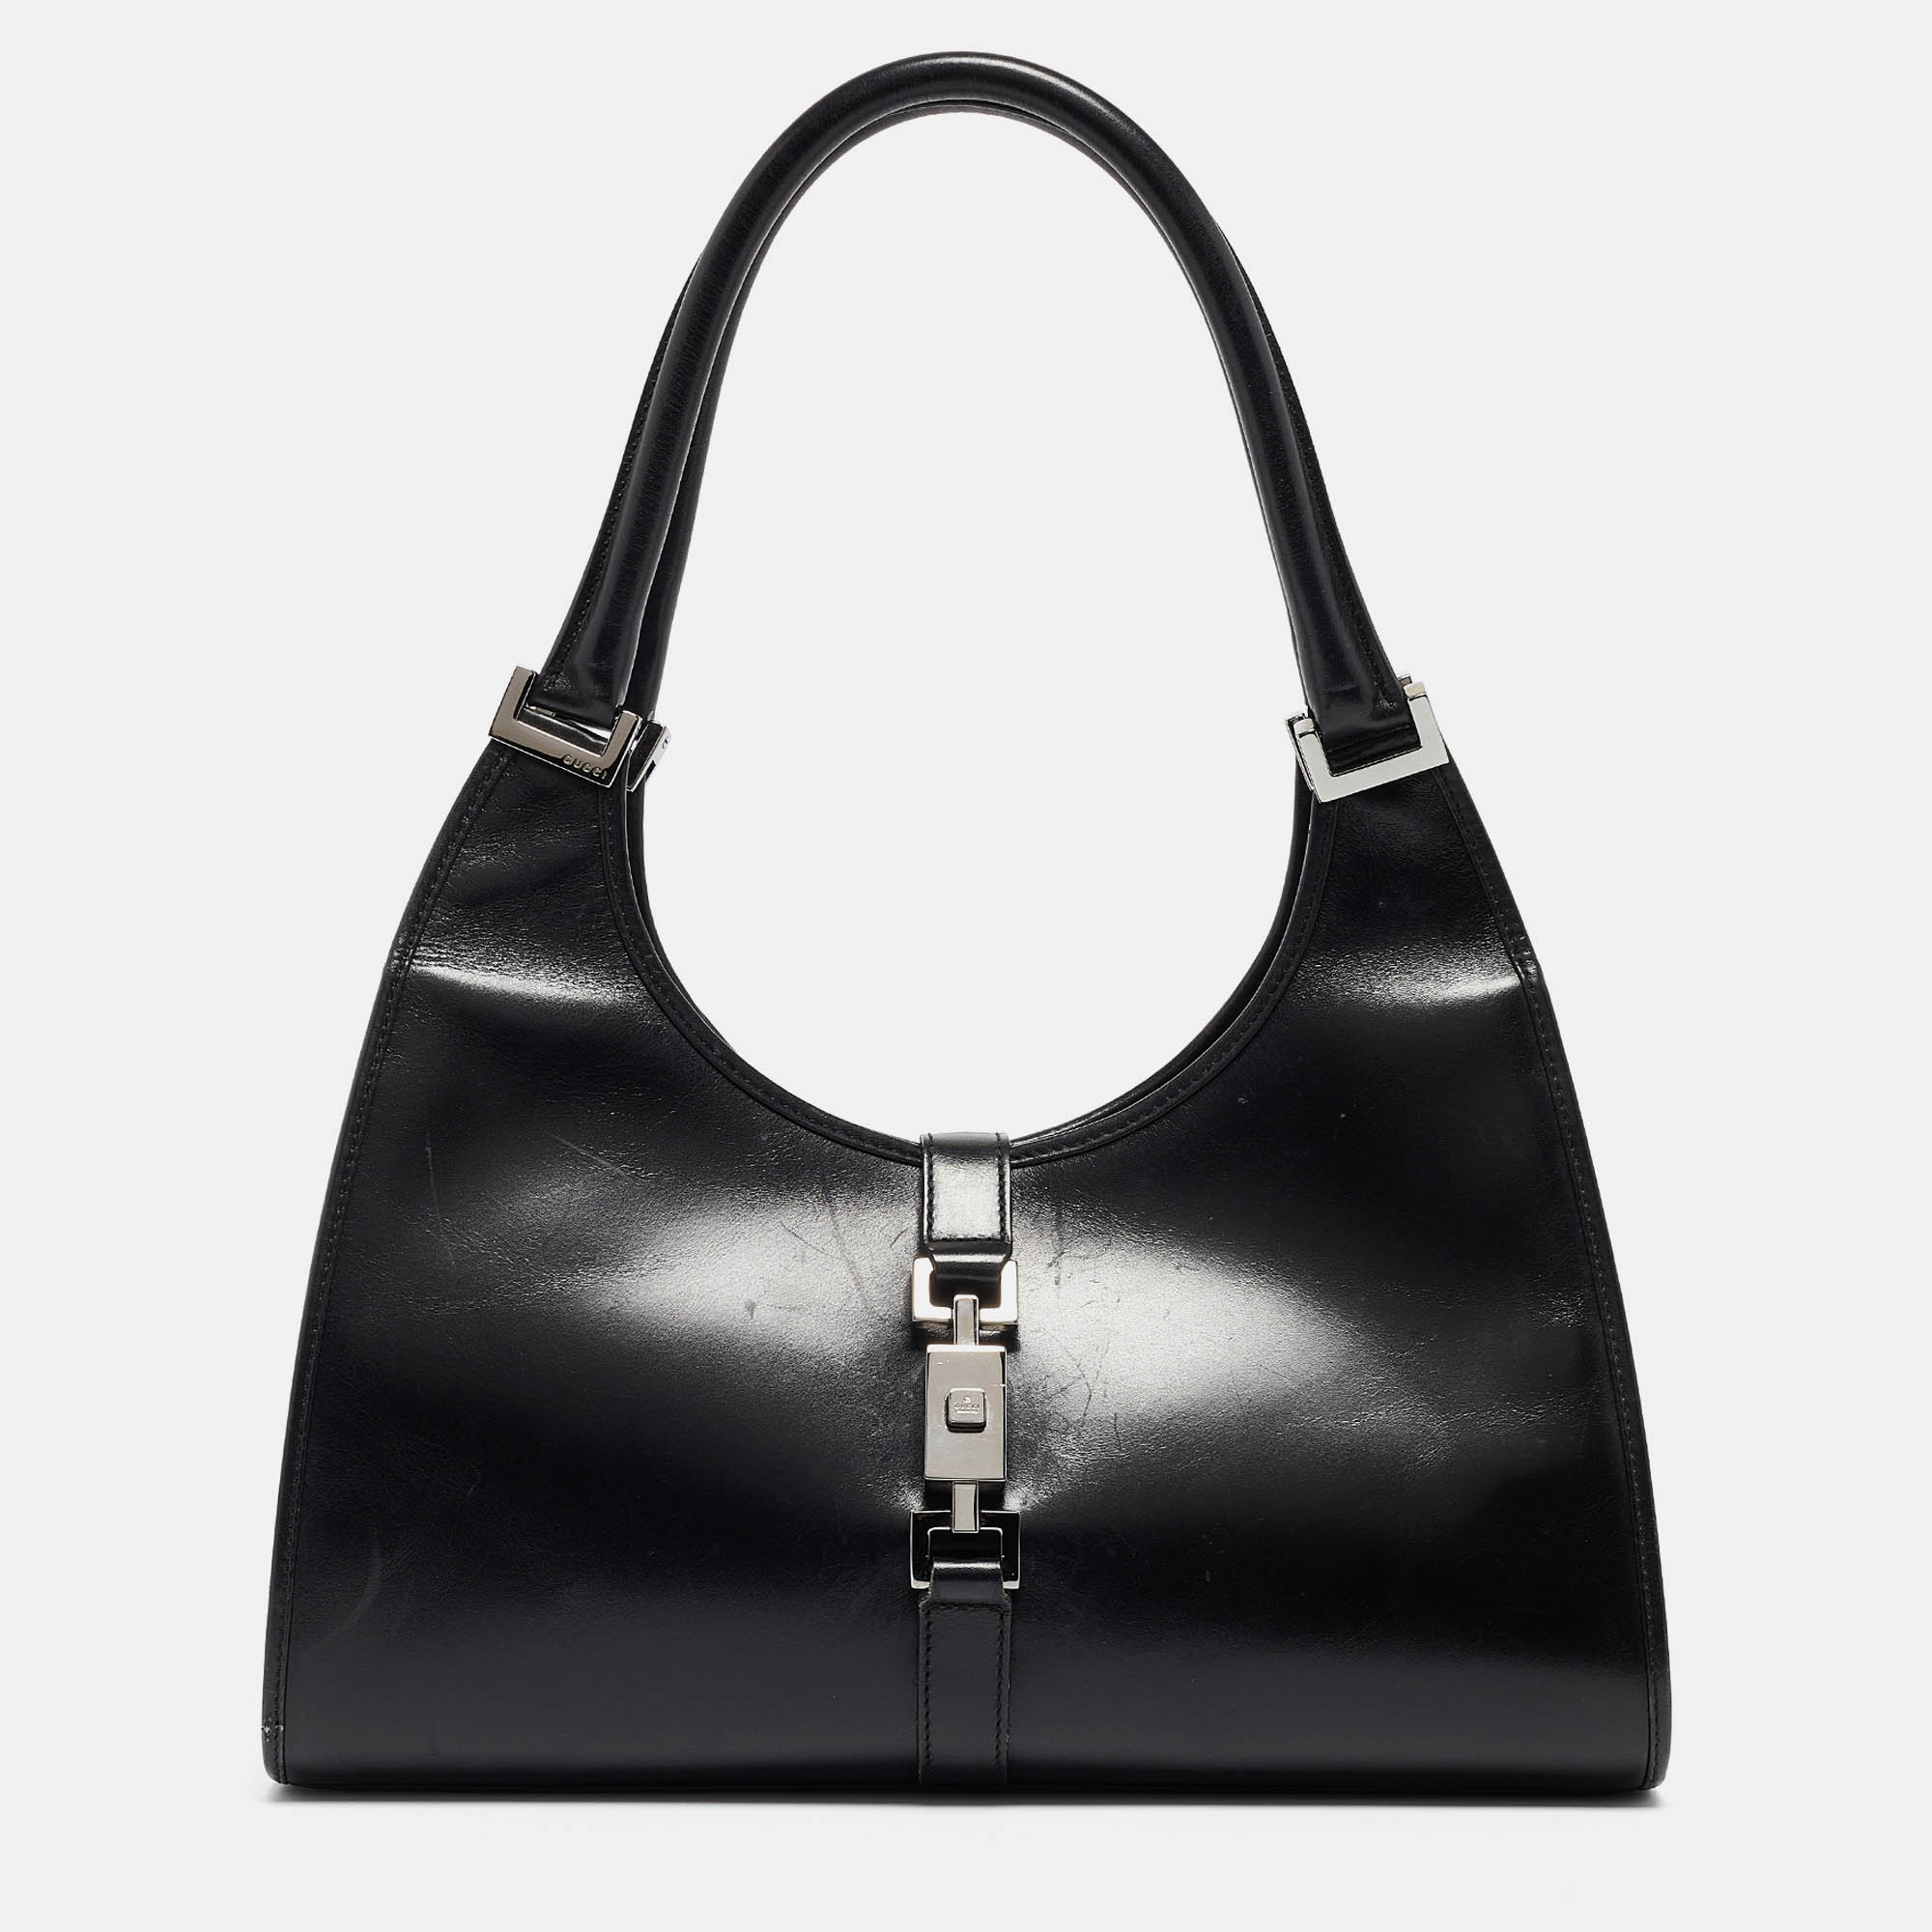 Gucci black leather jackie tote